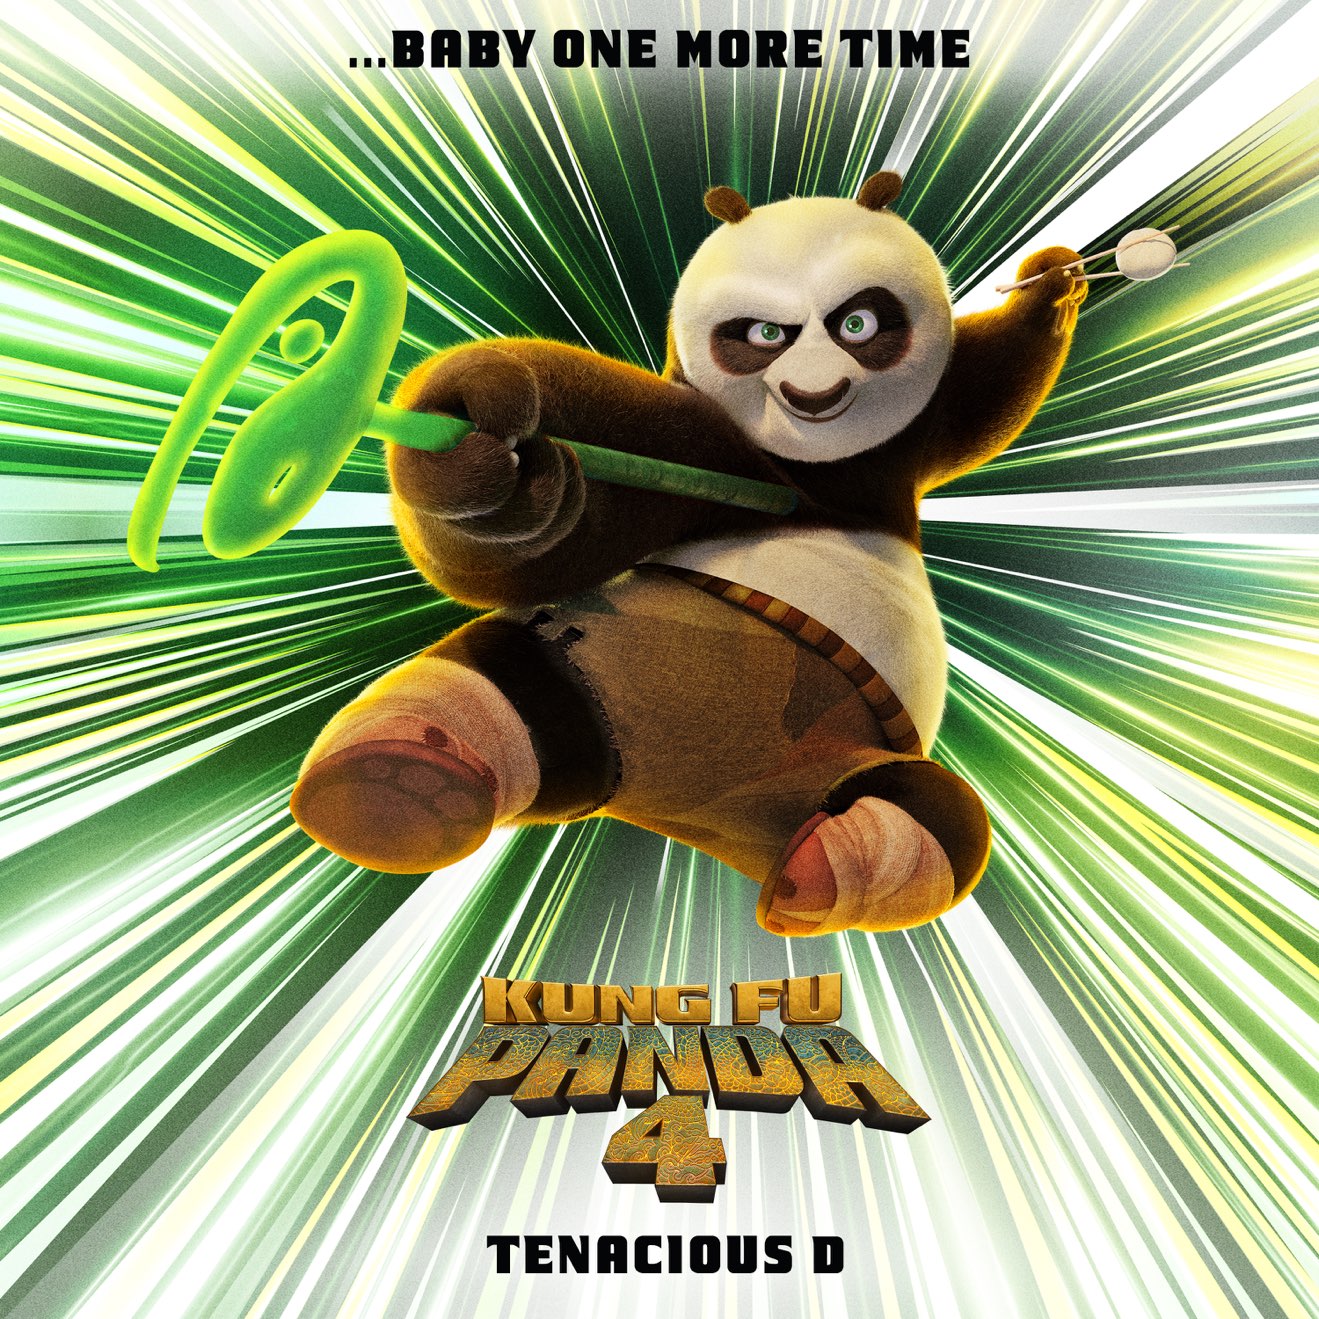 Tenacious D – …Baby One More Time (from Kung Fu Panda 4) – Single (2024) [iTunes Match M4A]